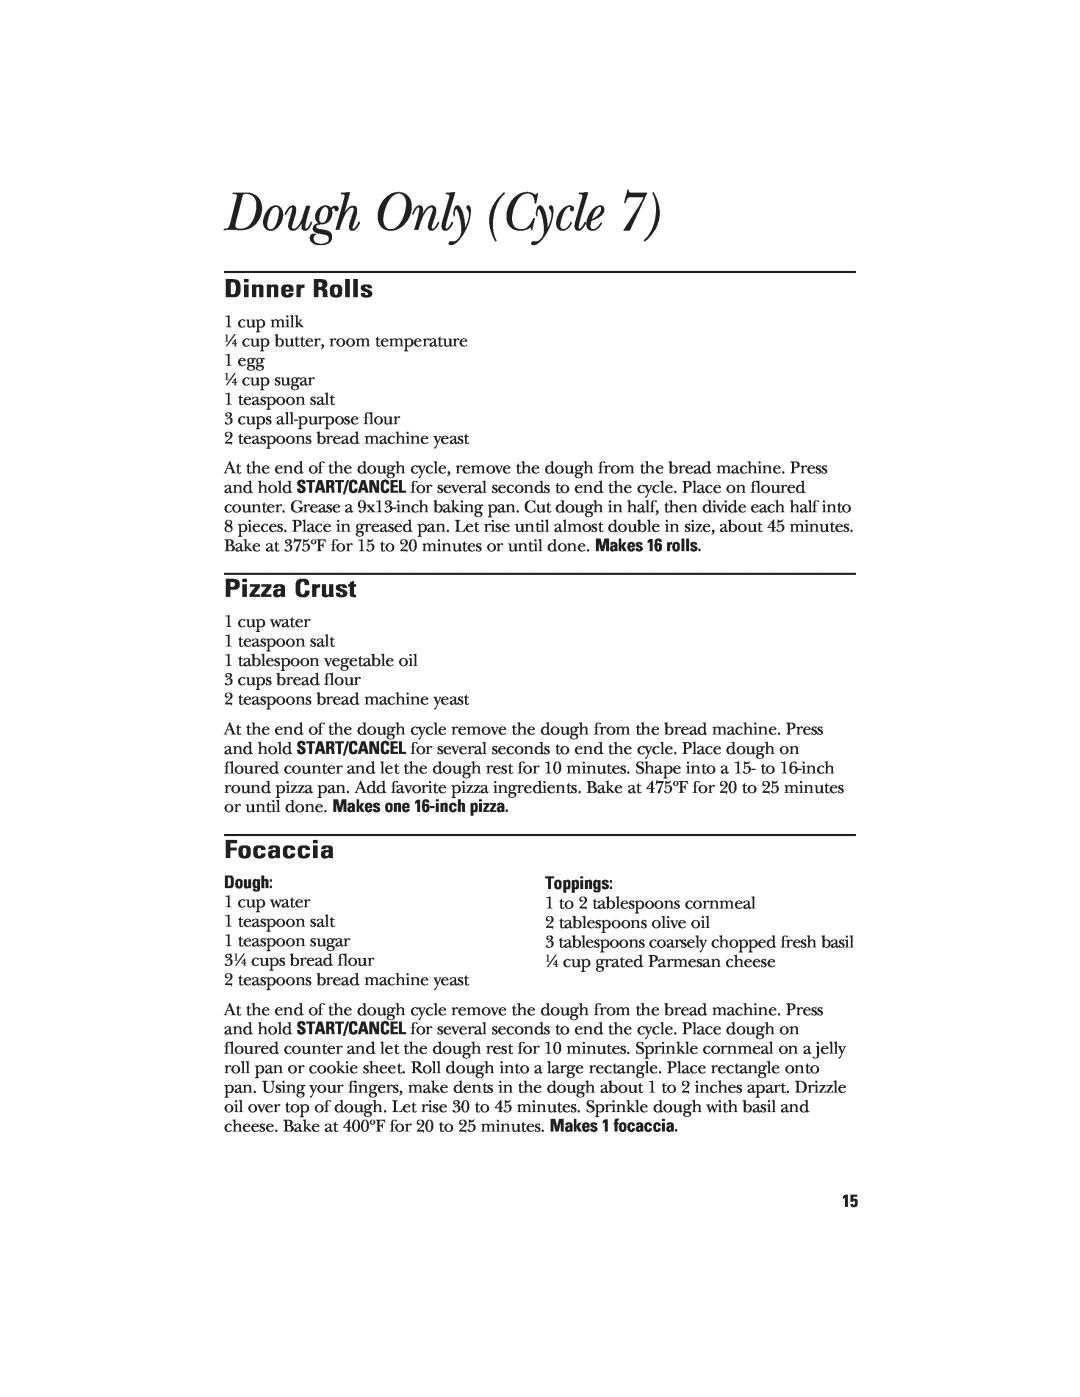 GE 840081500 quick start Dough Only Cycle, Dinner Rolls, Pizza Crust, Focaccia, Toppings 